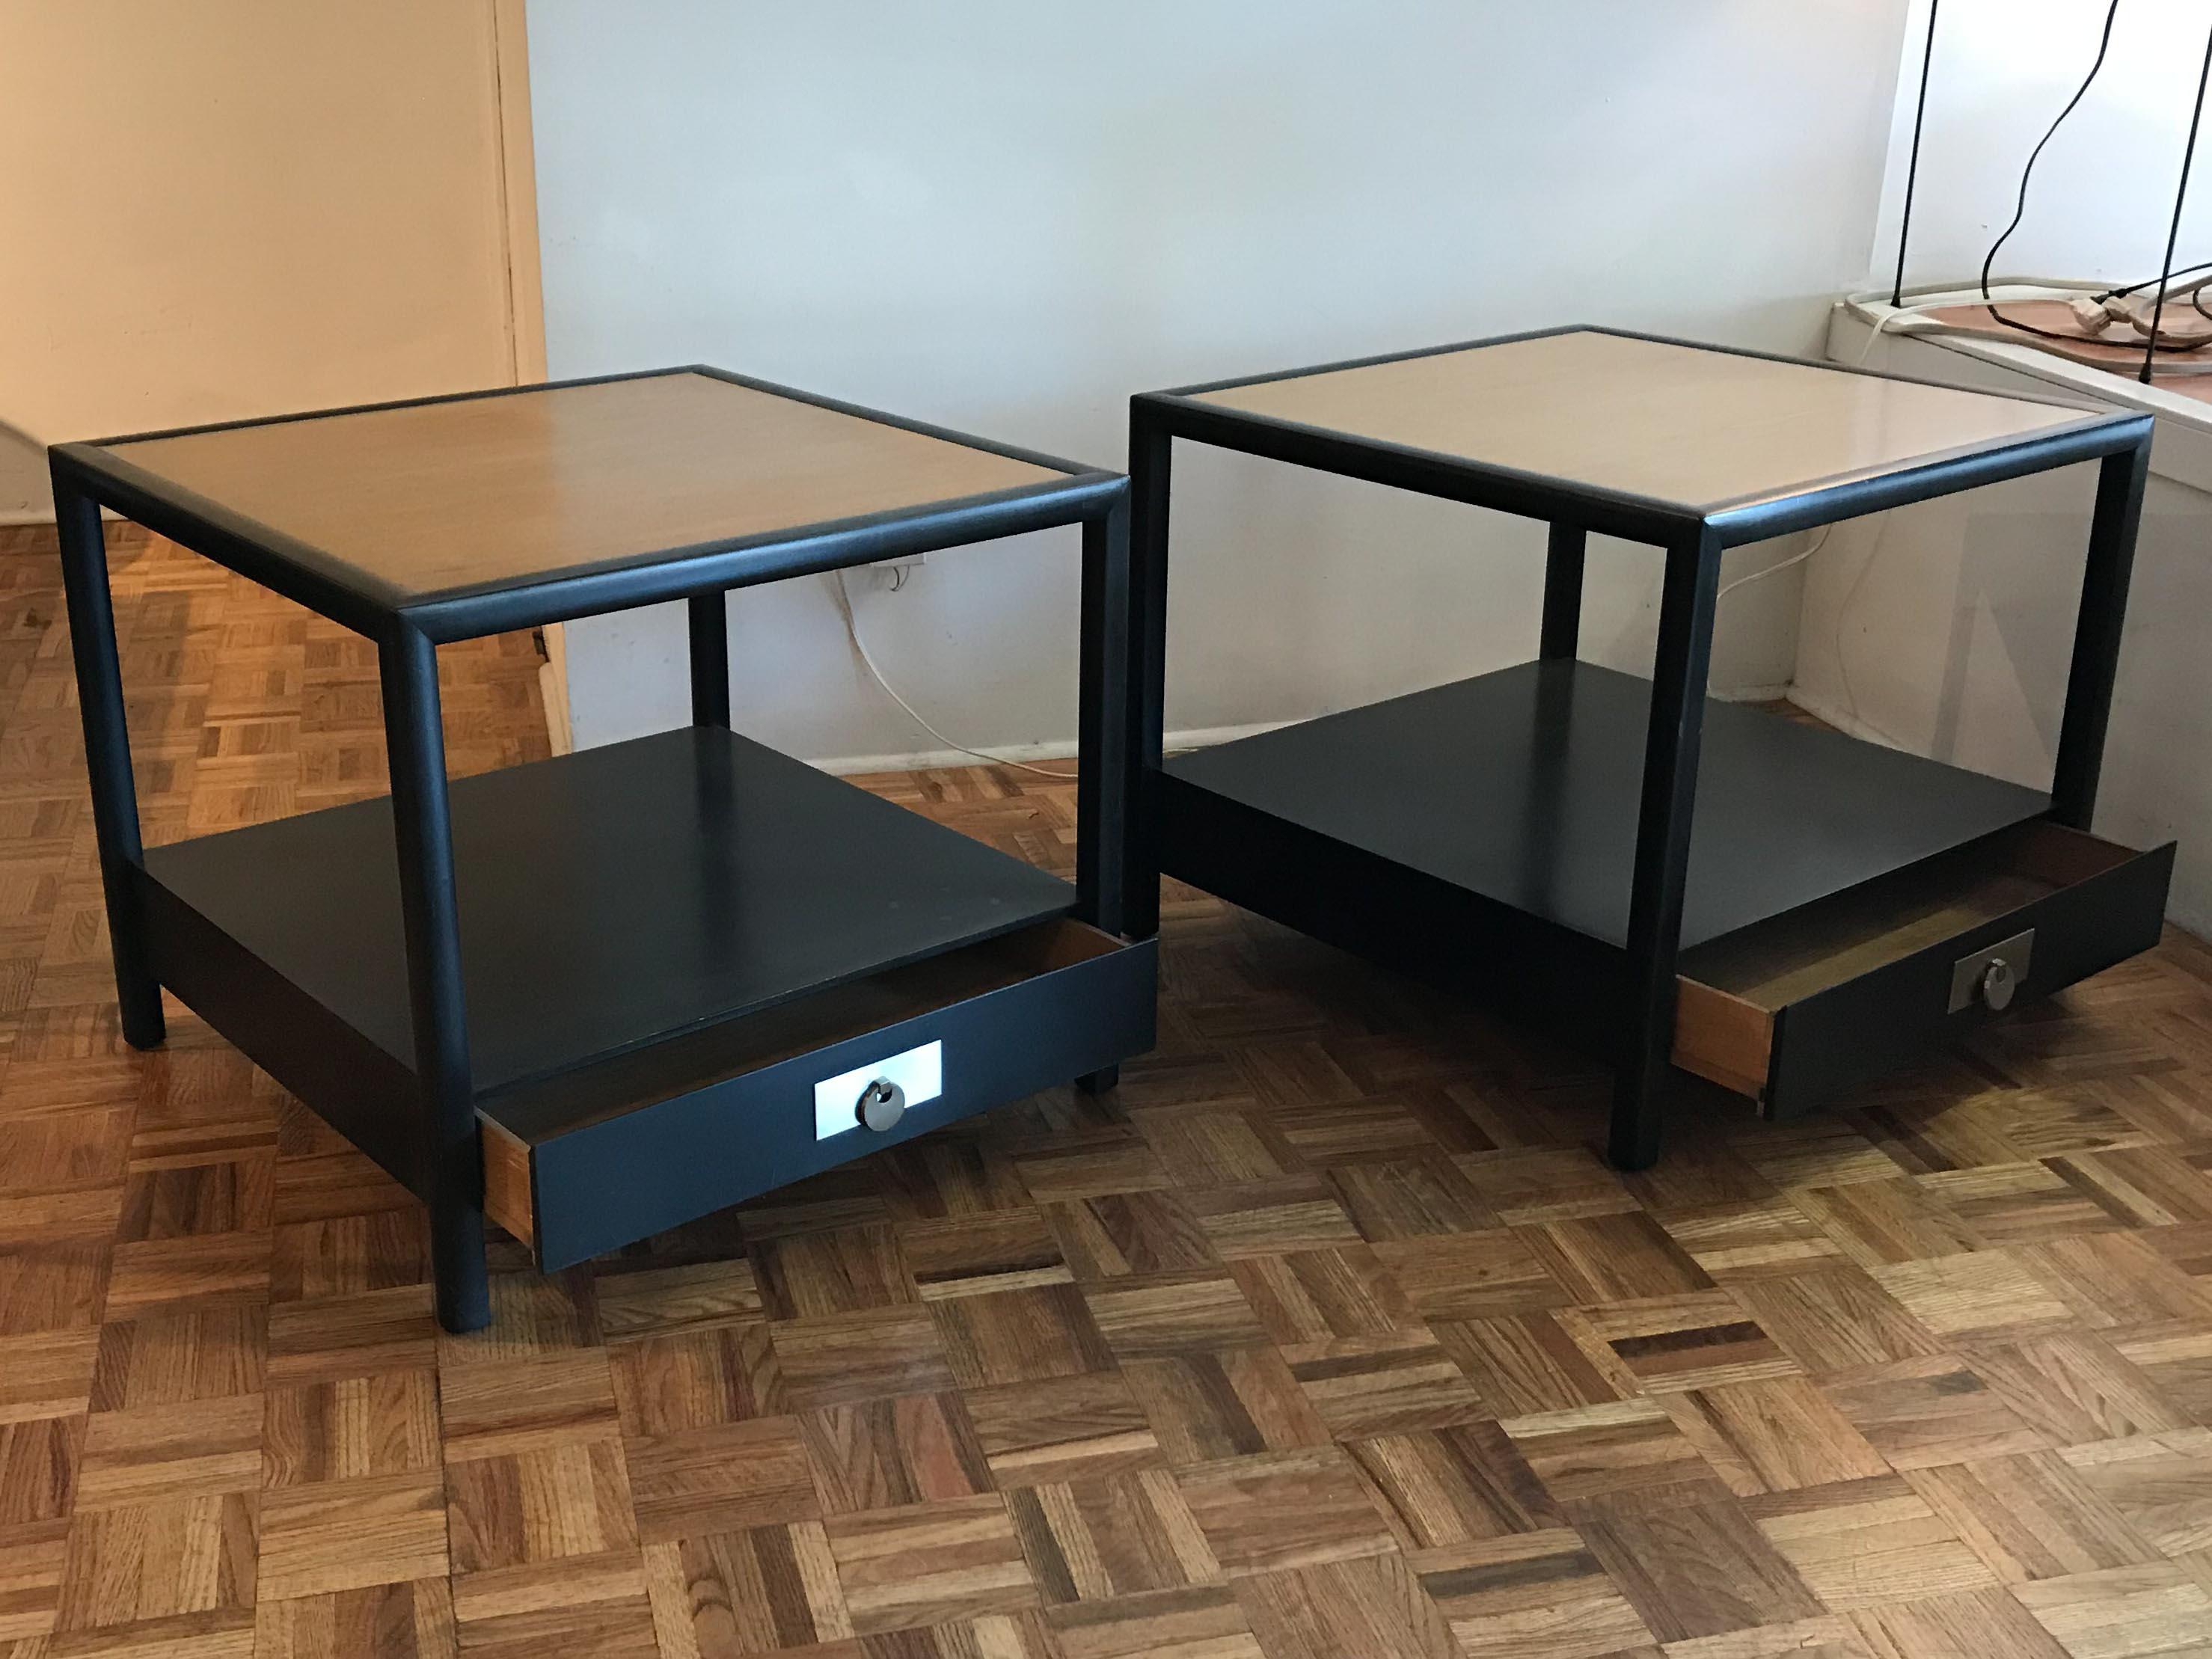 Pair of end tables or nightstands by Michael Taylor for Baker Furniture's New World collection. Original condition with minor wear consistent with age and use. Please see photos.
 